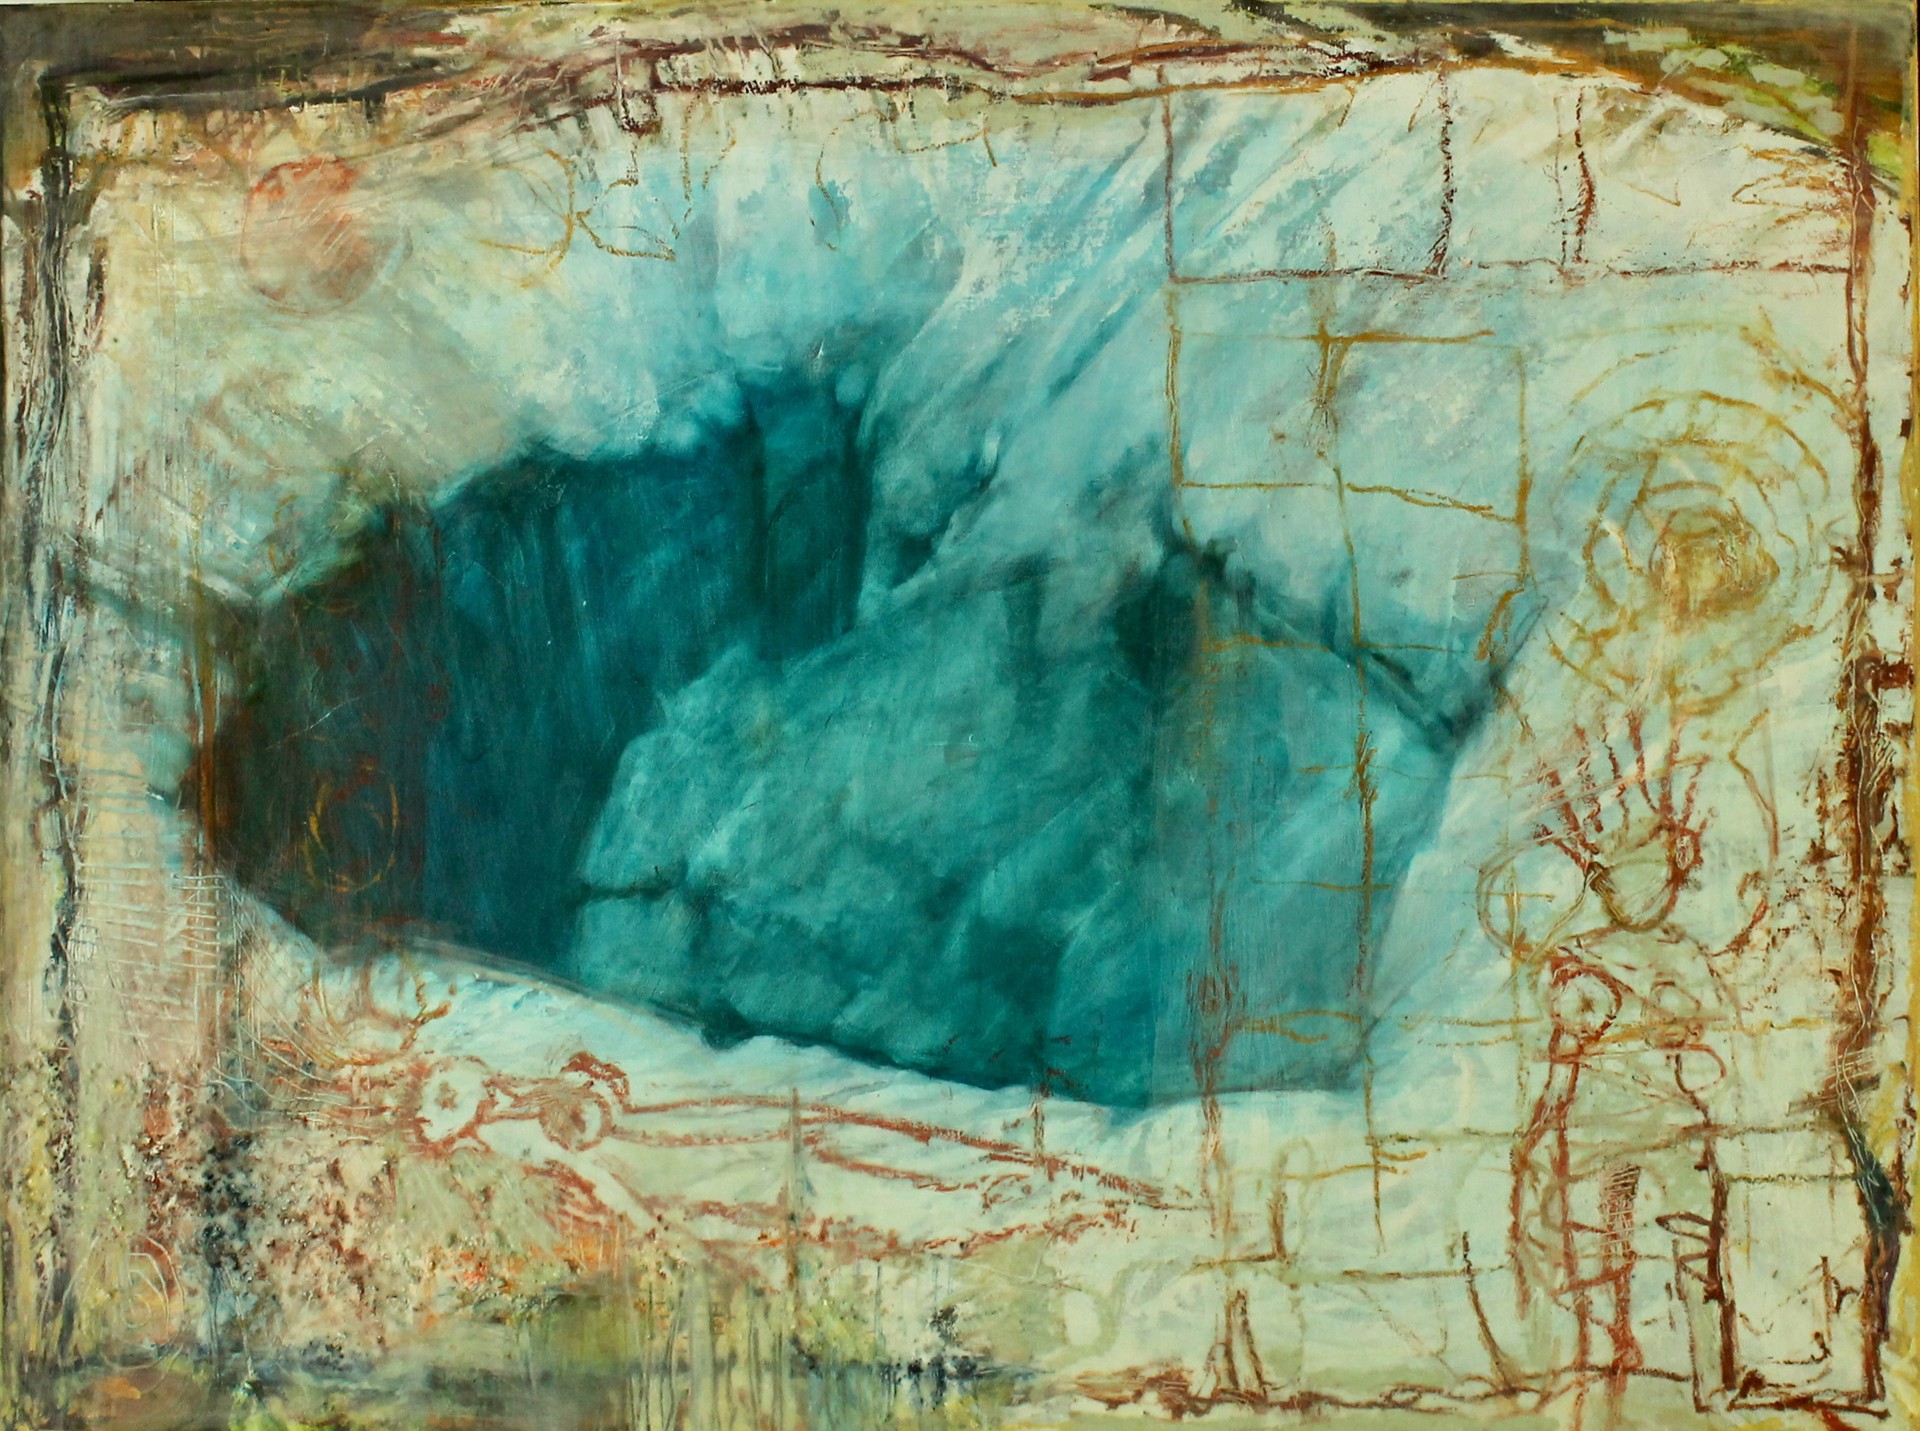 Ice Cave Excavation by Pat Magers